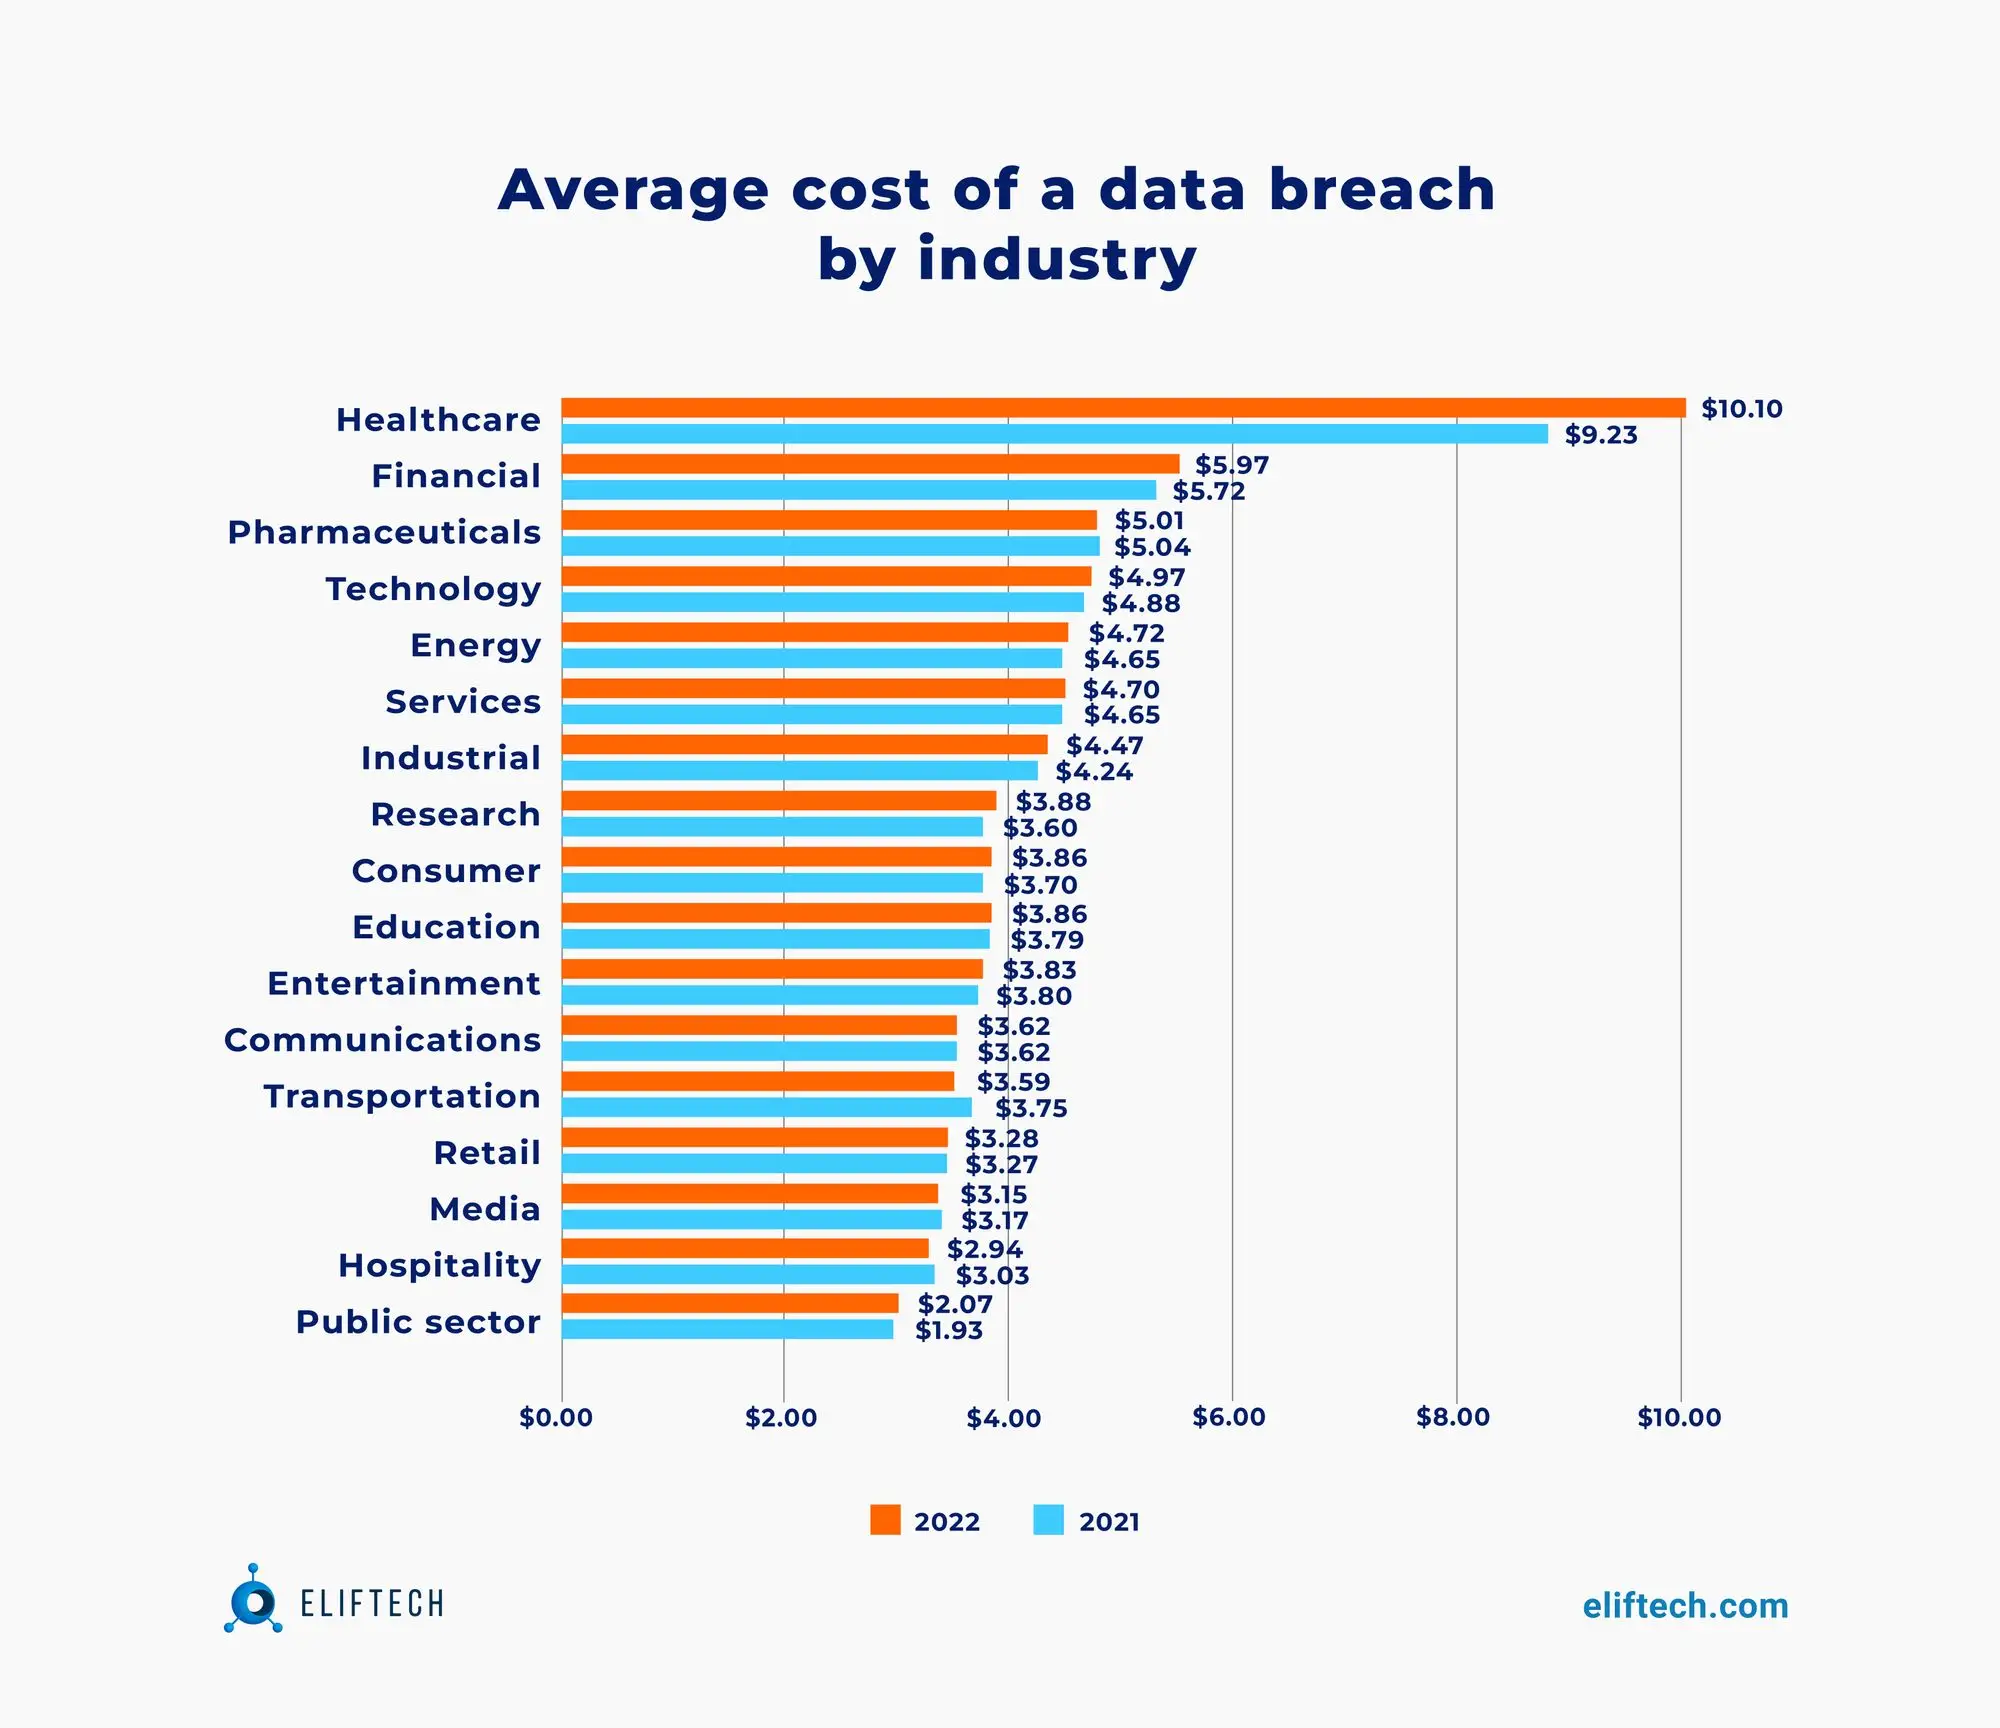  The cost of a typical data breach for FinTech organizations